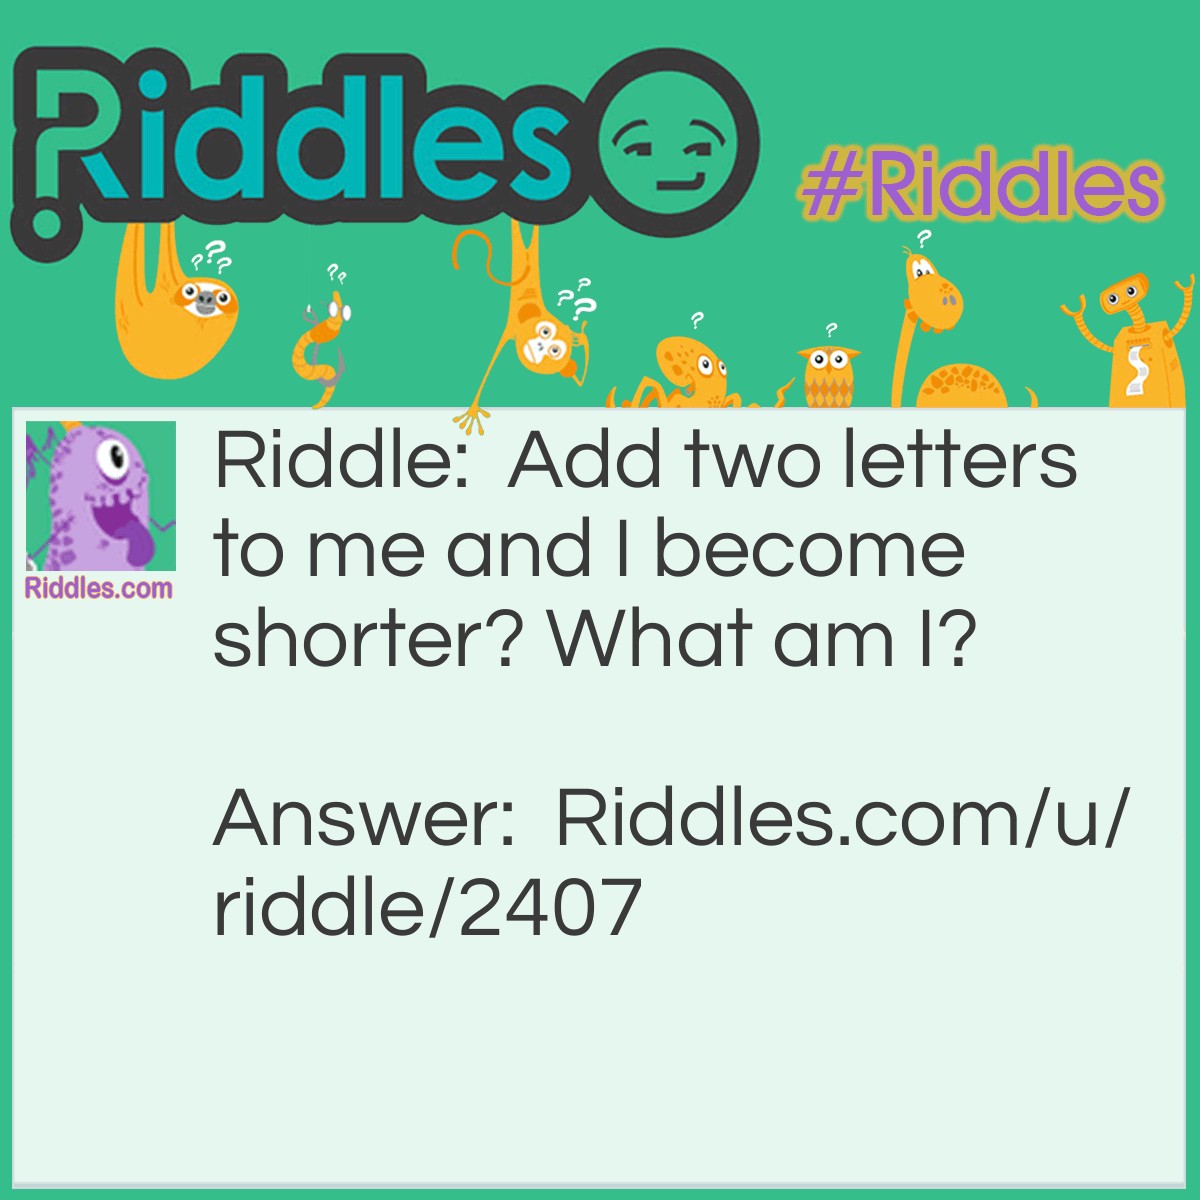 Riddle: Add two letters to me and I become shorter? What am I? Answer: I'm the word short, so if you add -er, then I literally become shorter.